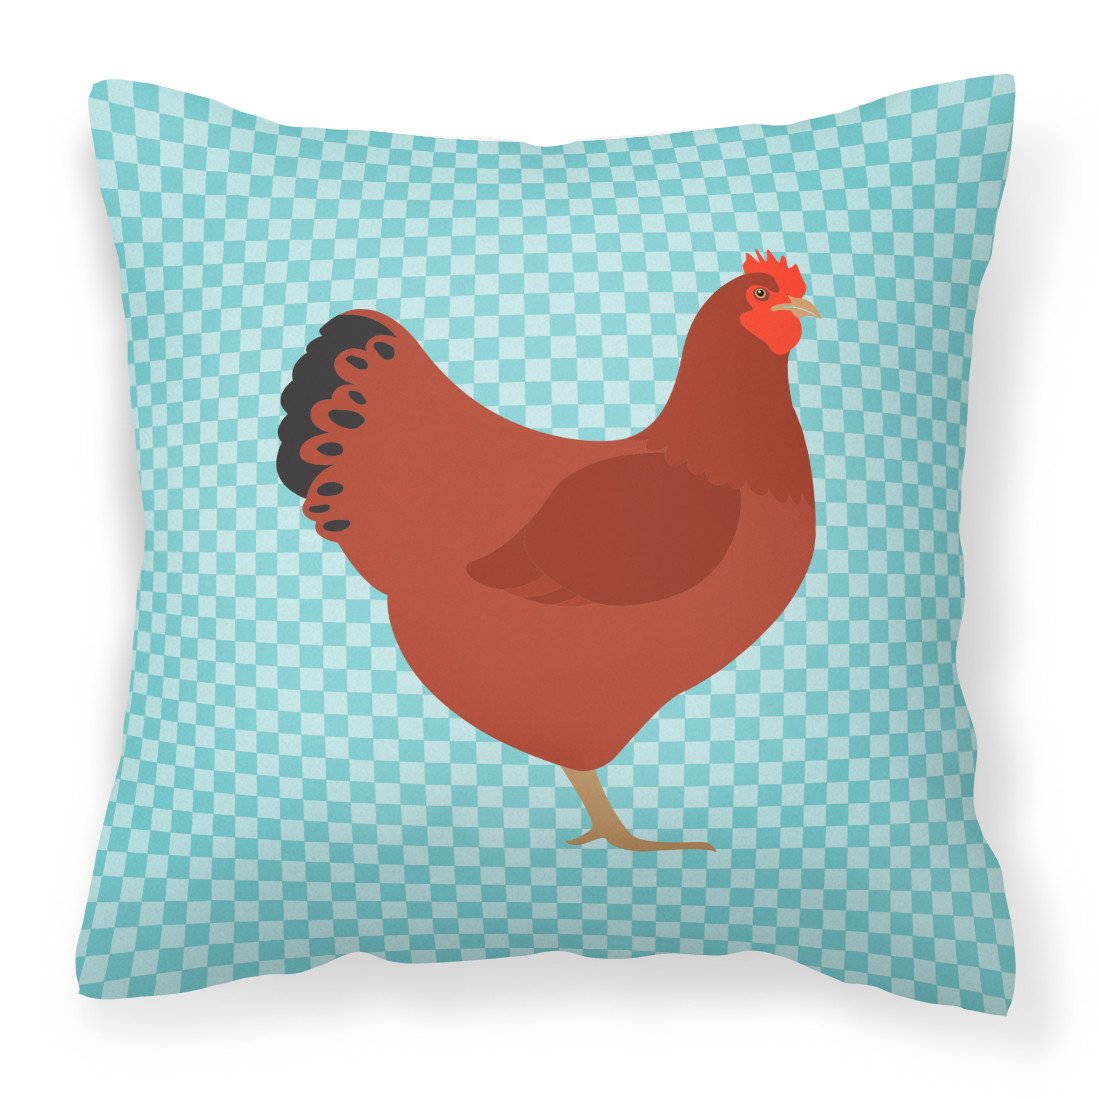 New Hampshire Red Chicken Blue Check Fabric Decorative Pillow BB8017PW1818 by Caroline's Treasures